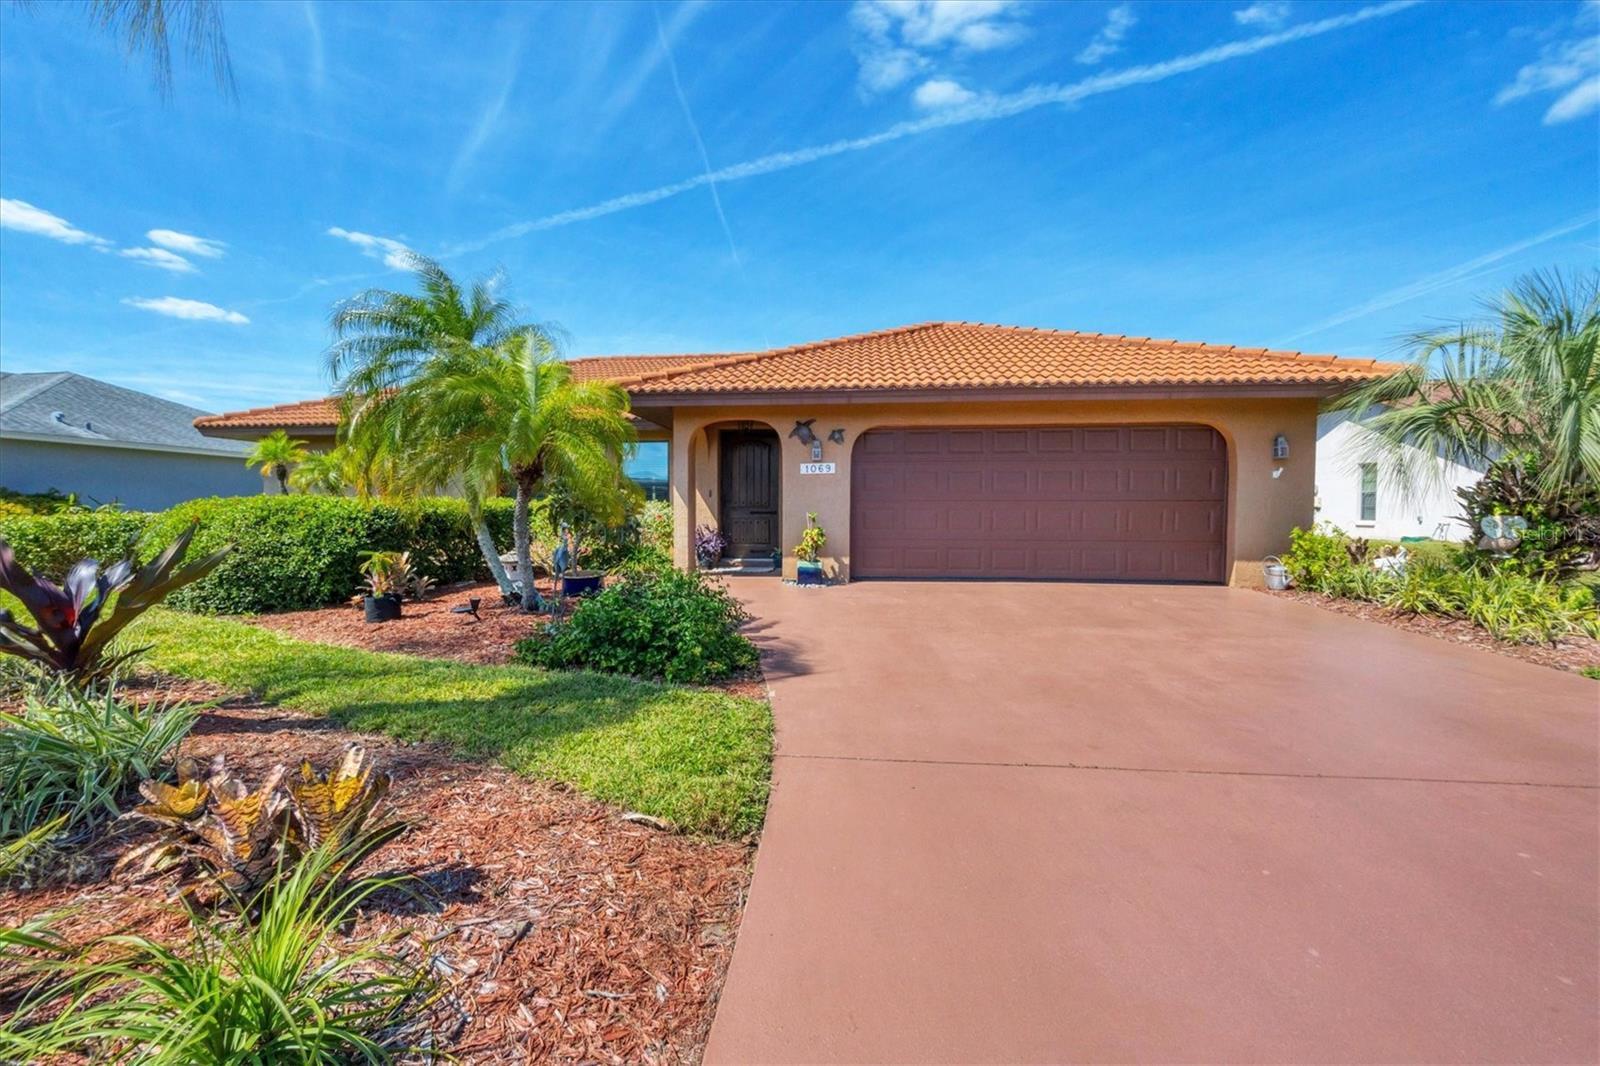 Photo one of 1069 N Cypress Point Dr Venice FL 34293 | MLS A4606979